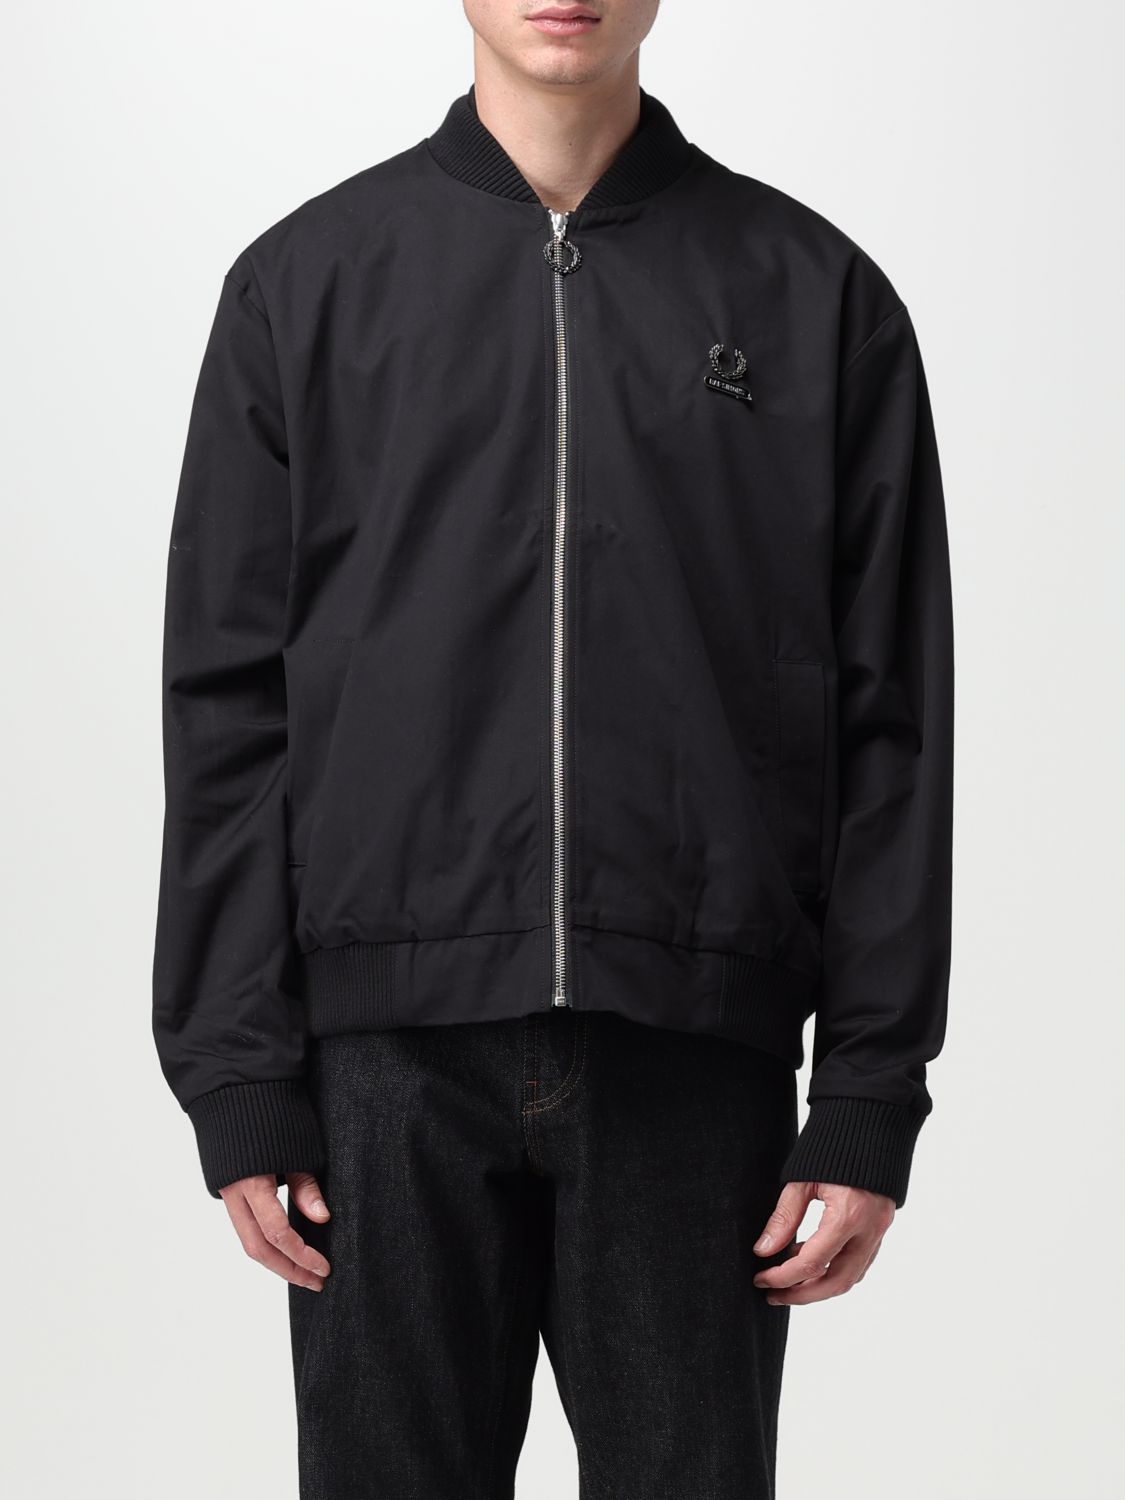 Fred Perry By Raf Simons Jacket FRED PERRY BY RAF SIMONS Men colour Black